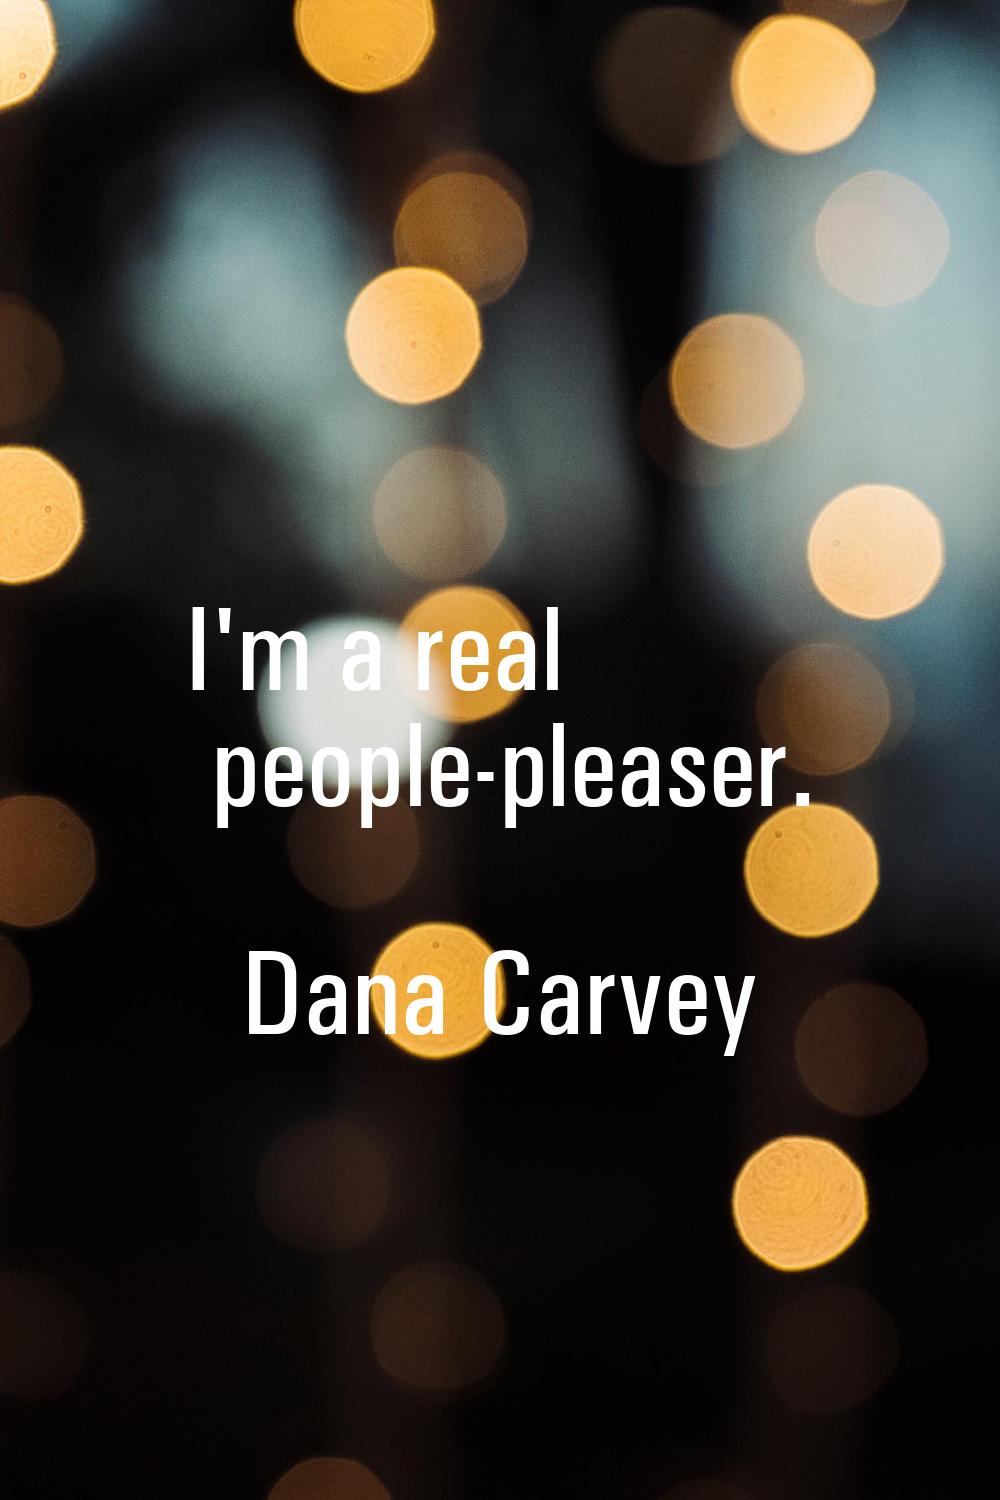 I'm a real people-pleaser.